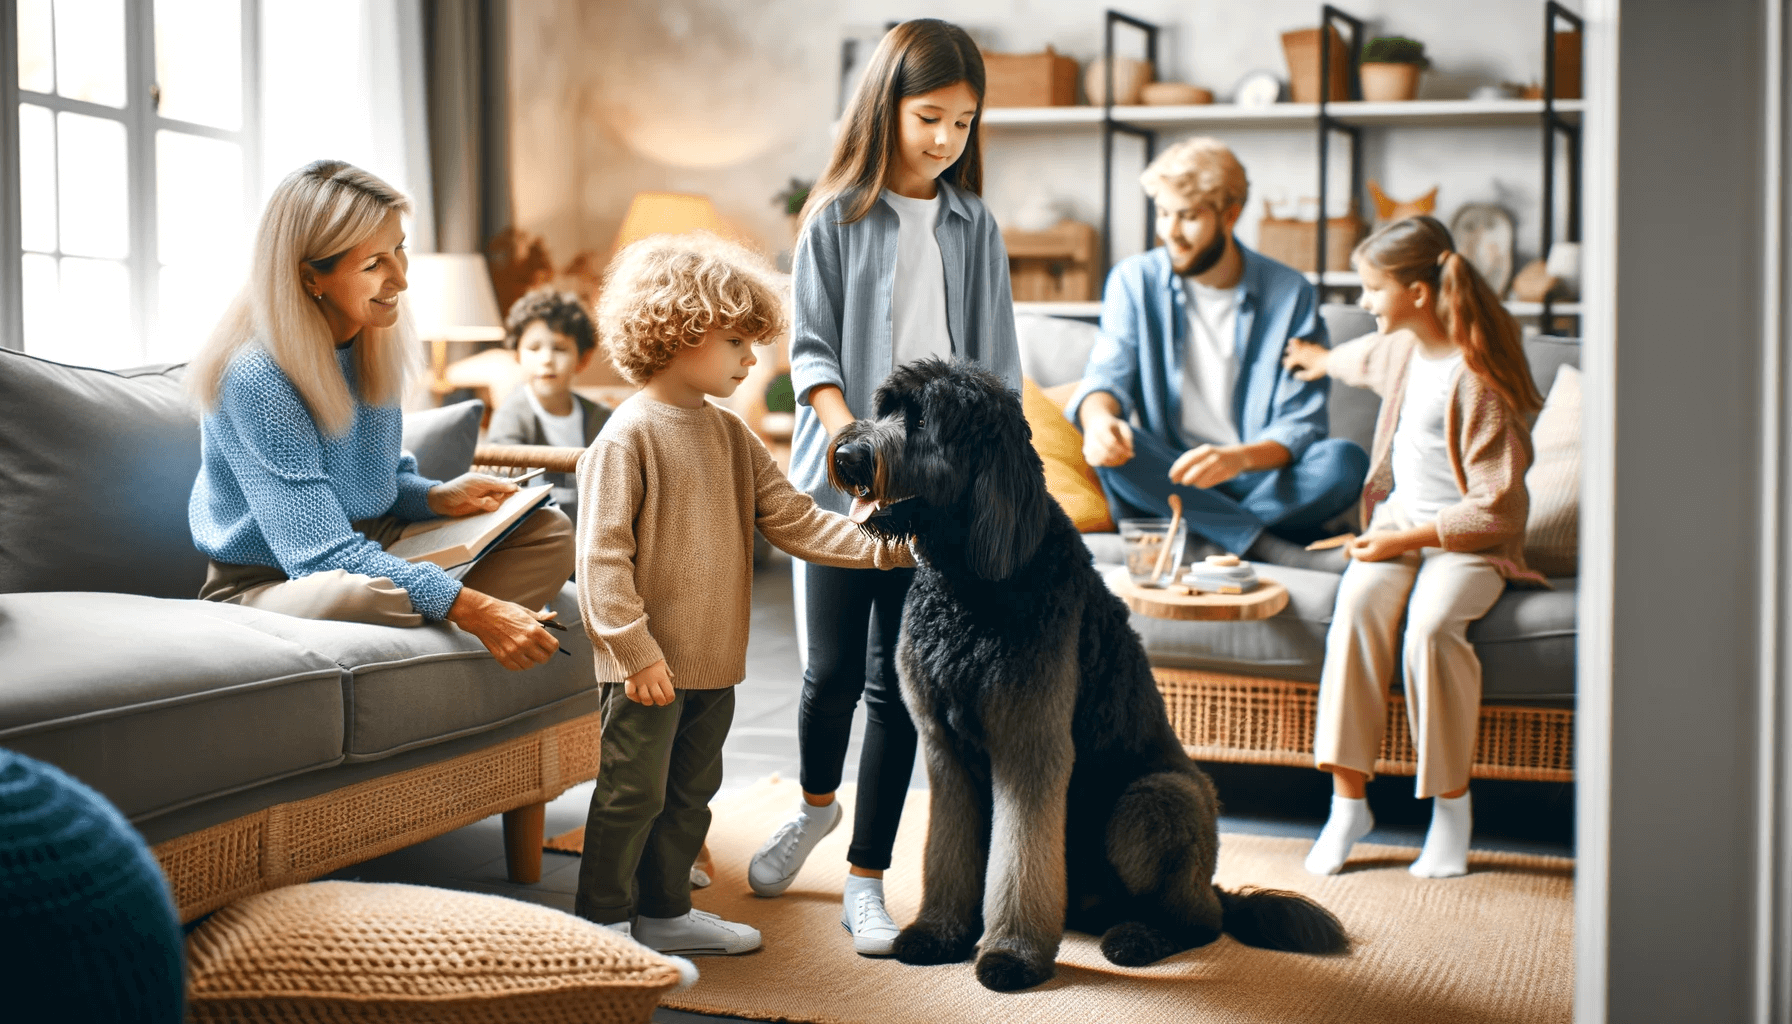 Black Aussiedoodle in a family environment interacting with both children and adults in a cozy living room